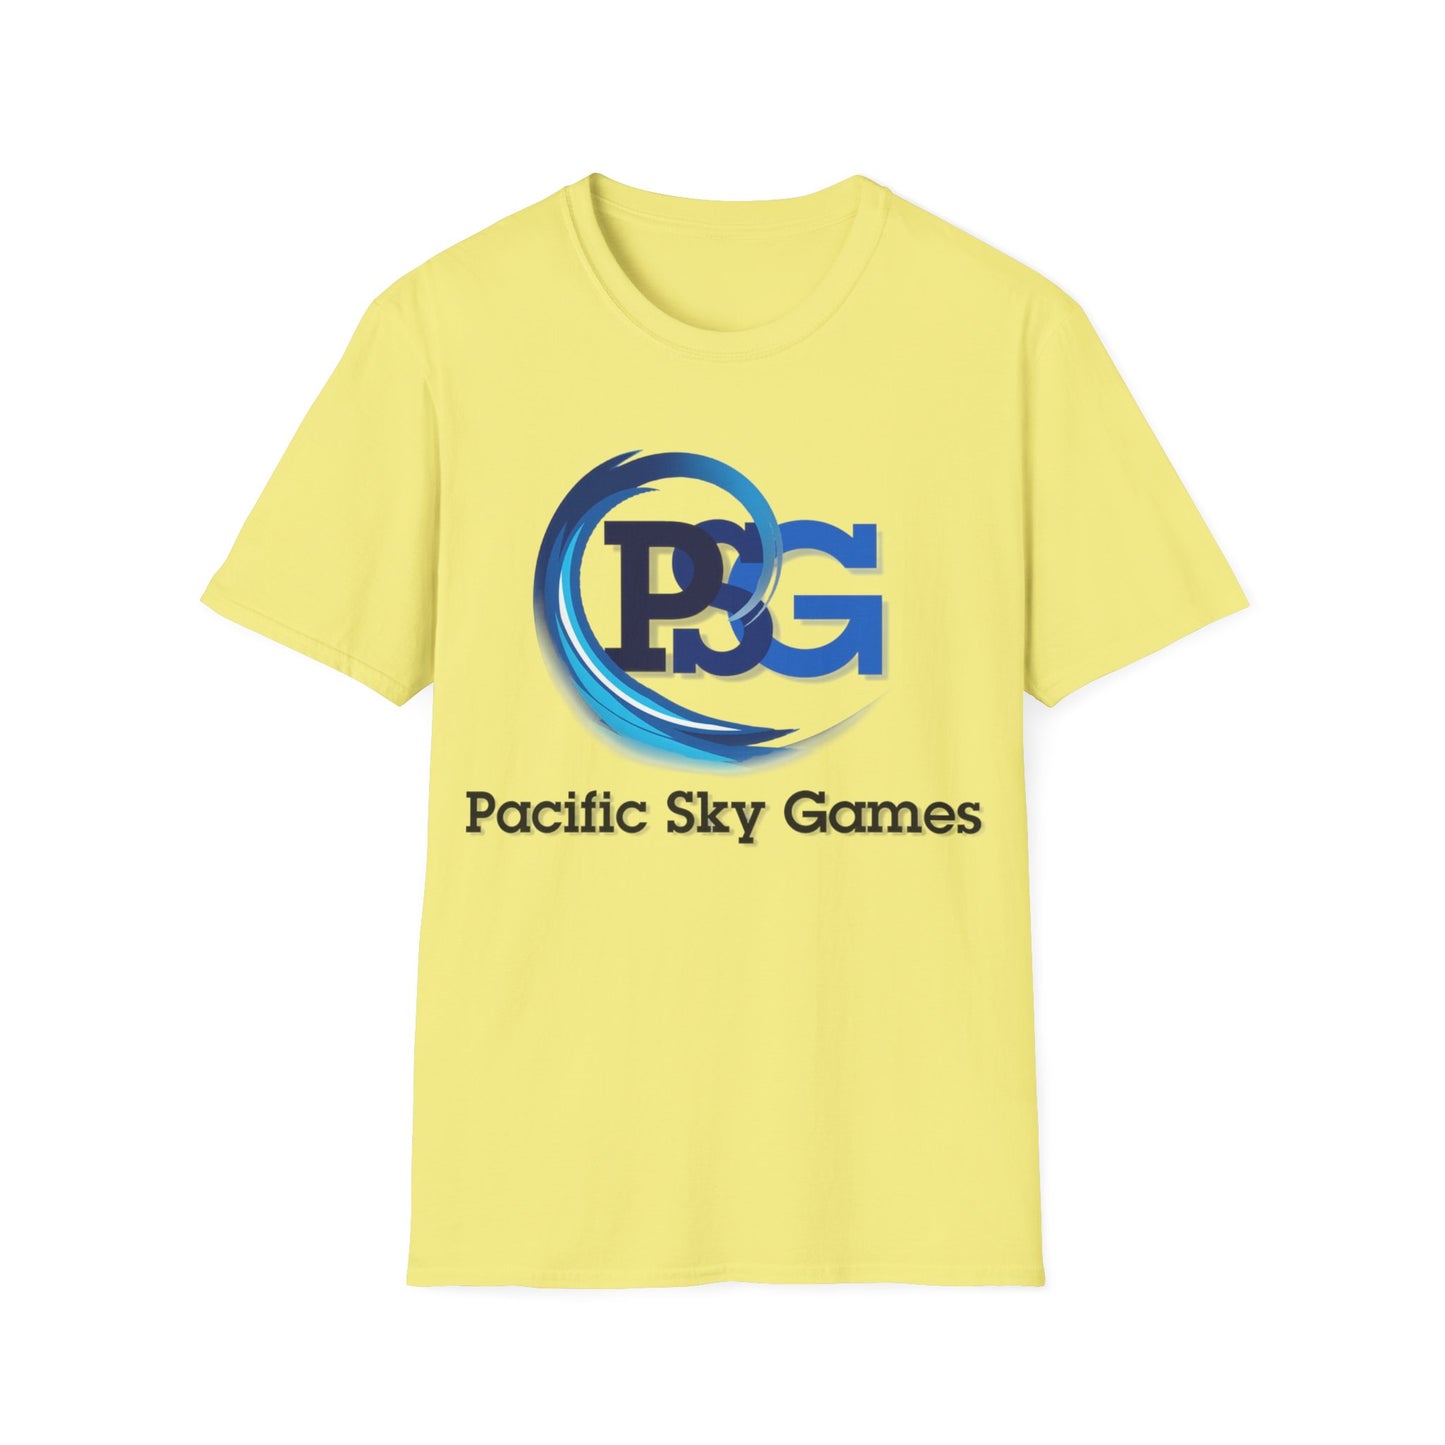 Pacific Sky Games - Unisex Softstyle T-Shirt